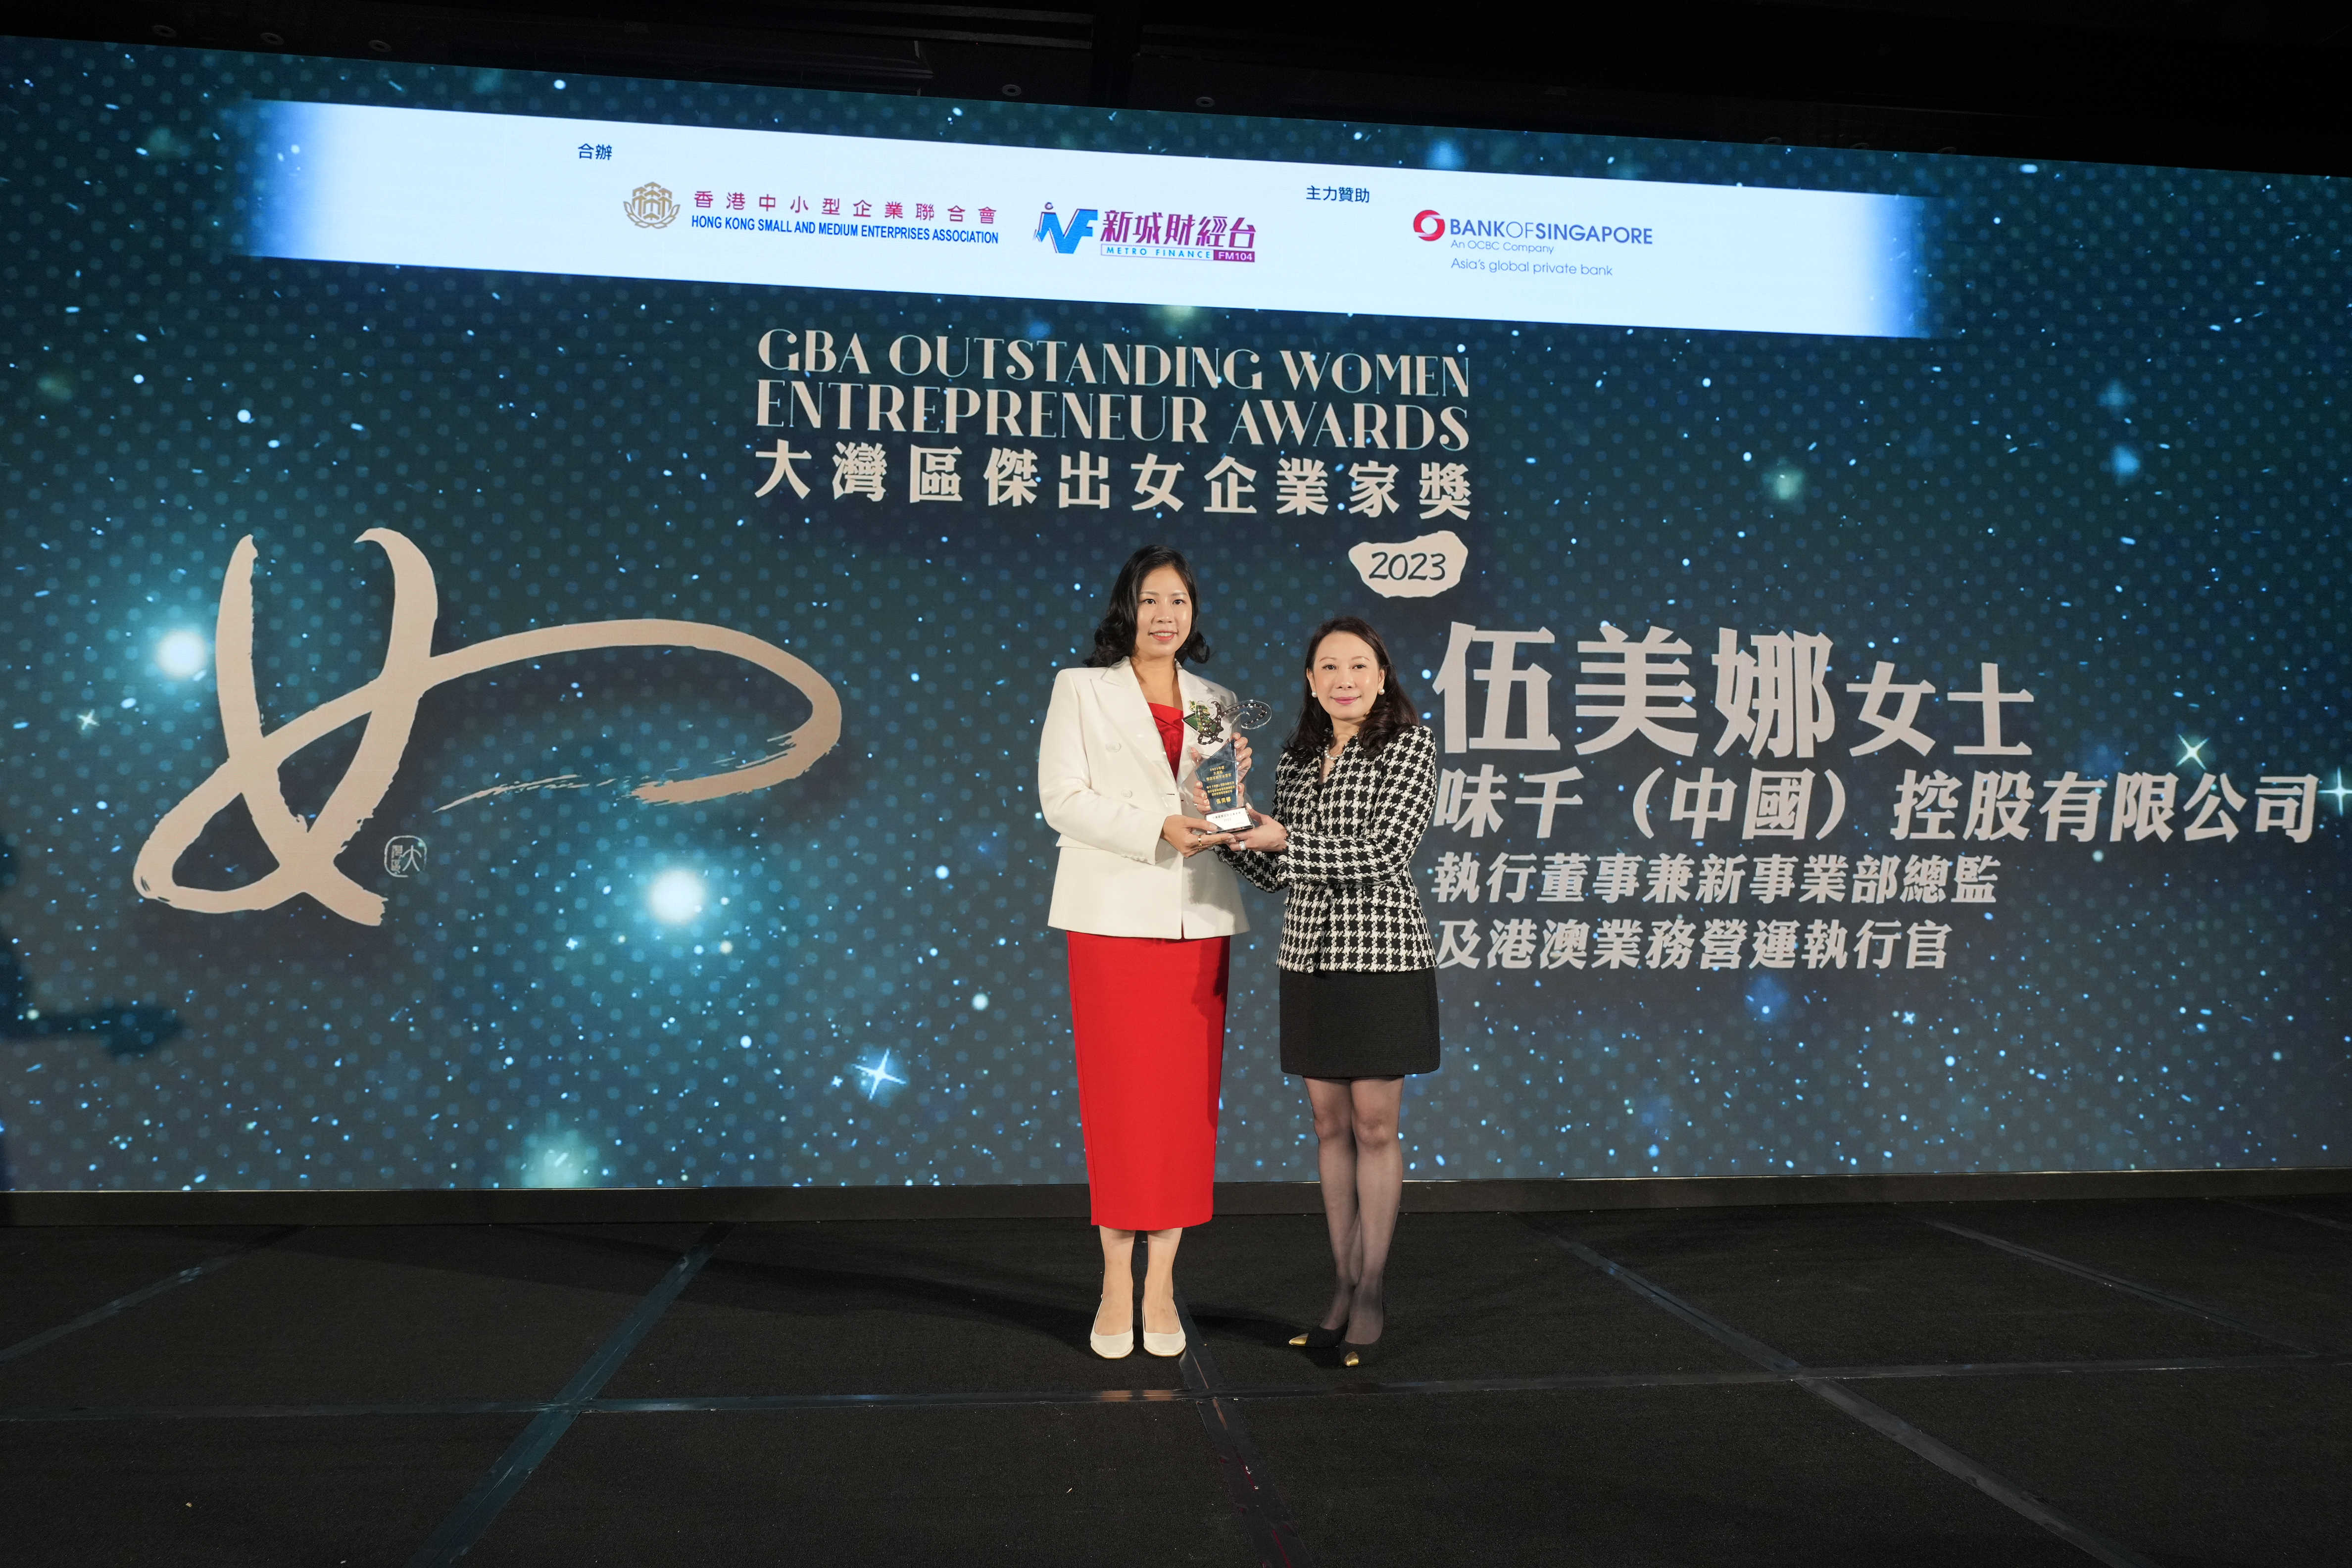 Ms. Teresa Lee, Alternate Chief Executive & Head of Greater China, Bank of Singapore (HK Branch), served as the primary sponsor and presented the 